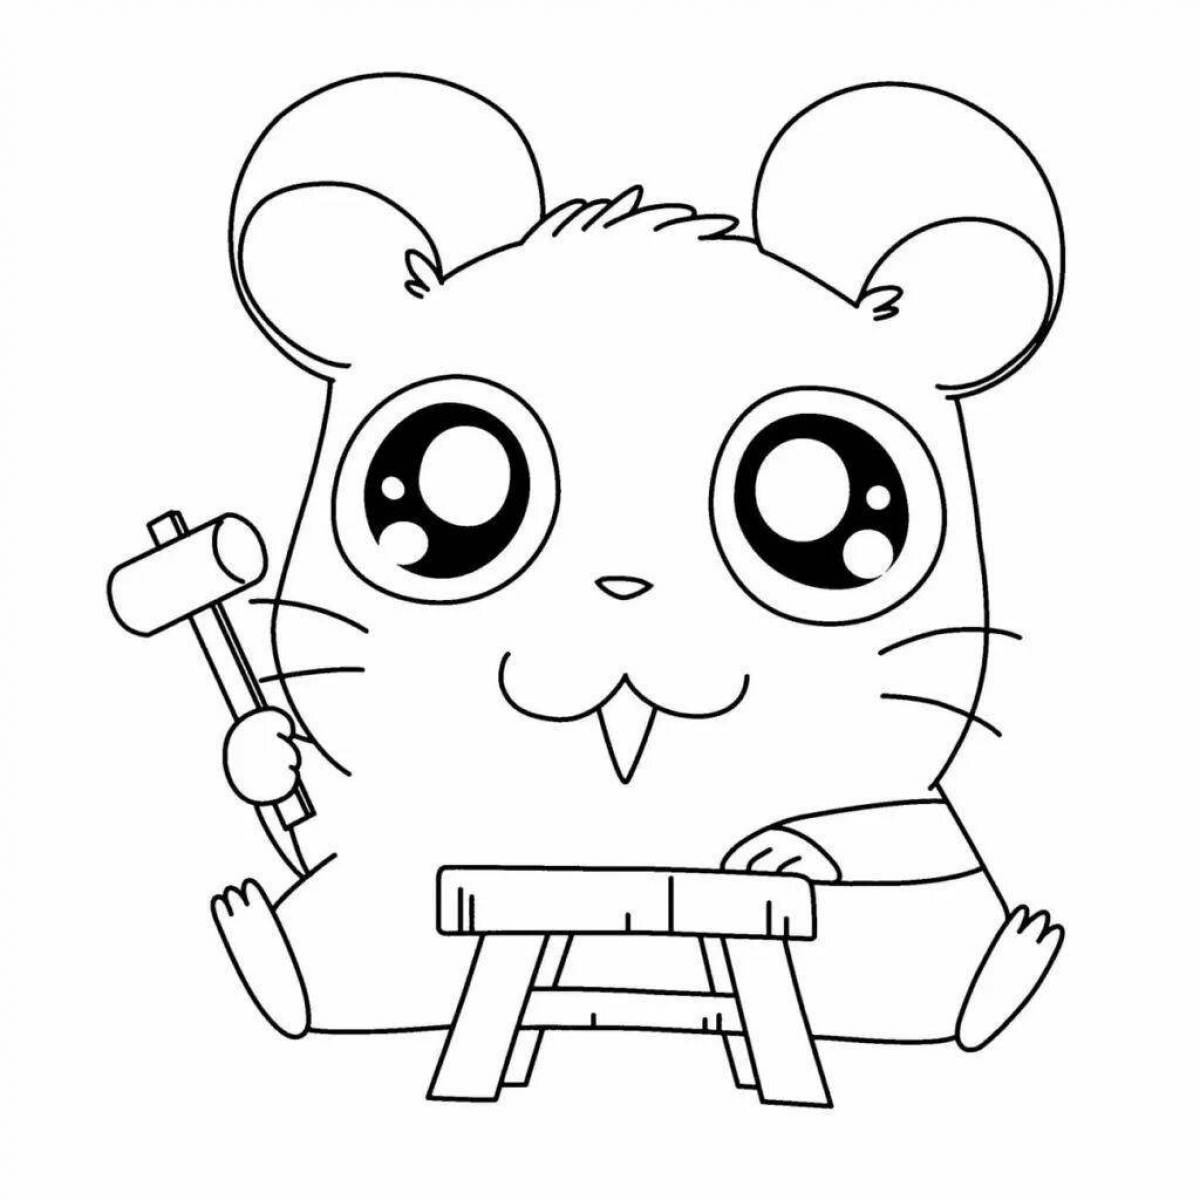 Hamster bubble coloring pages